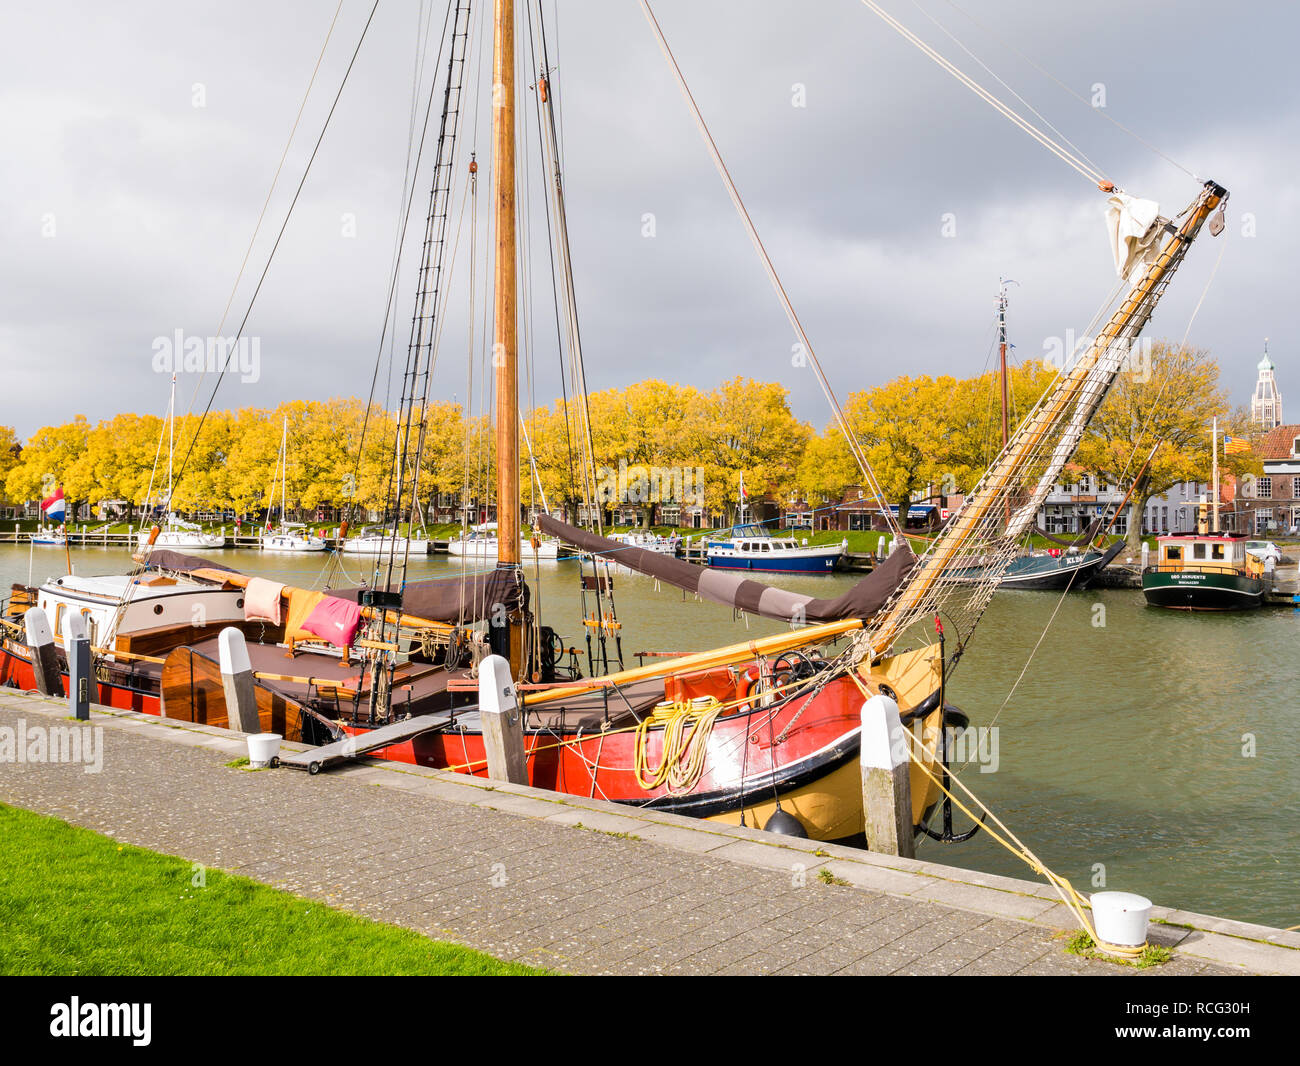 Traditional sail barge on quayside in outer harbour of old town of Enkhuizen, Noord-Holland, Netherlands Stock Photo